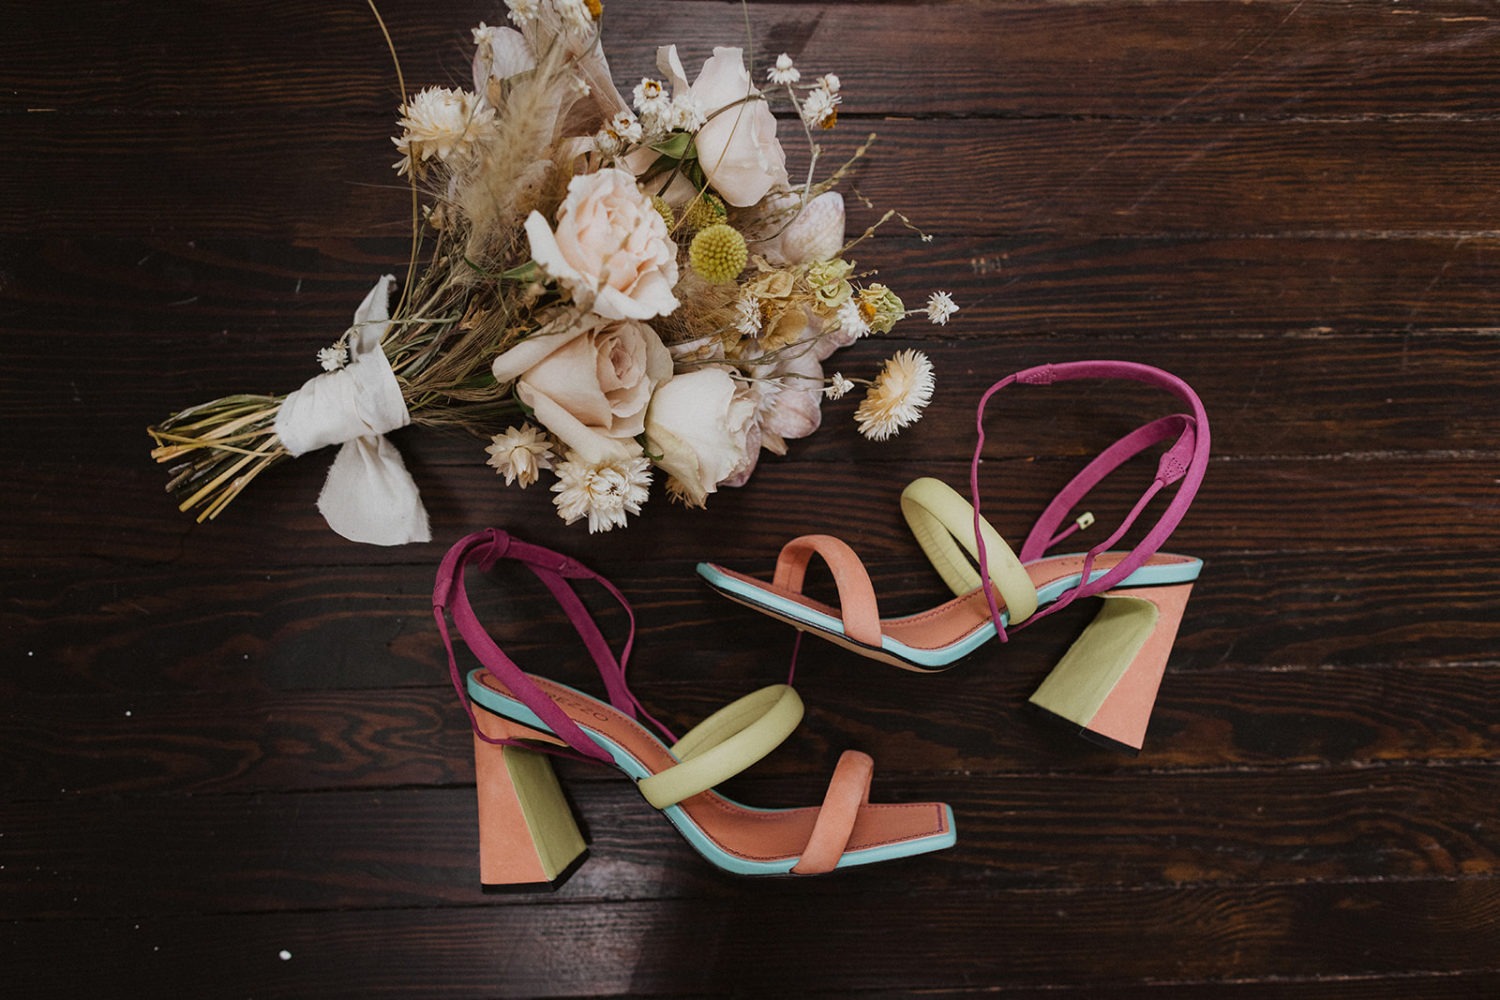 colorful wedding shoes on wood beside white wedding bouquet